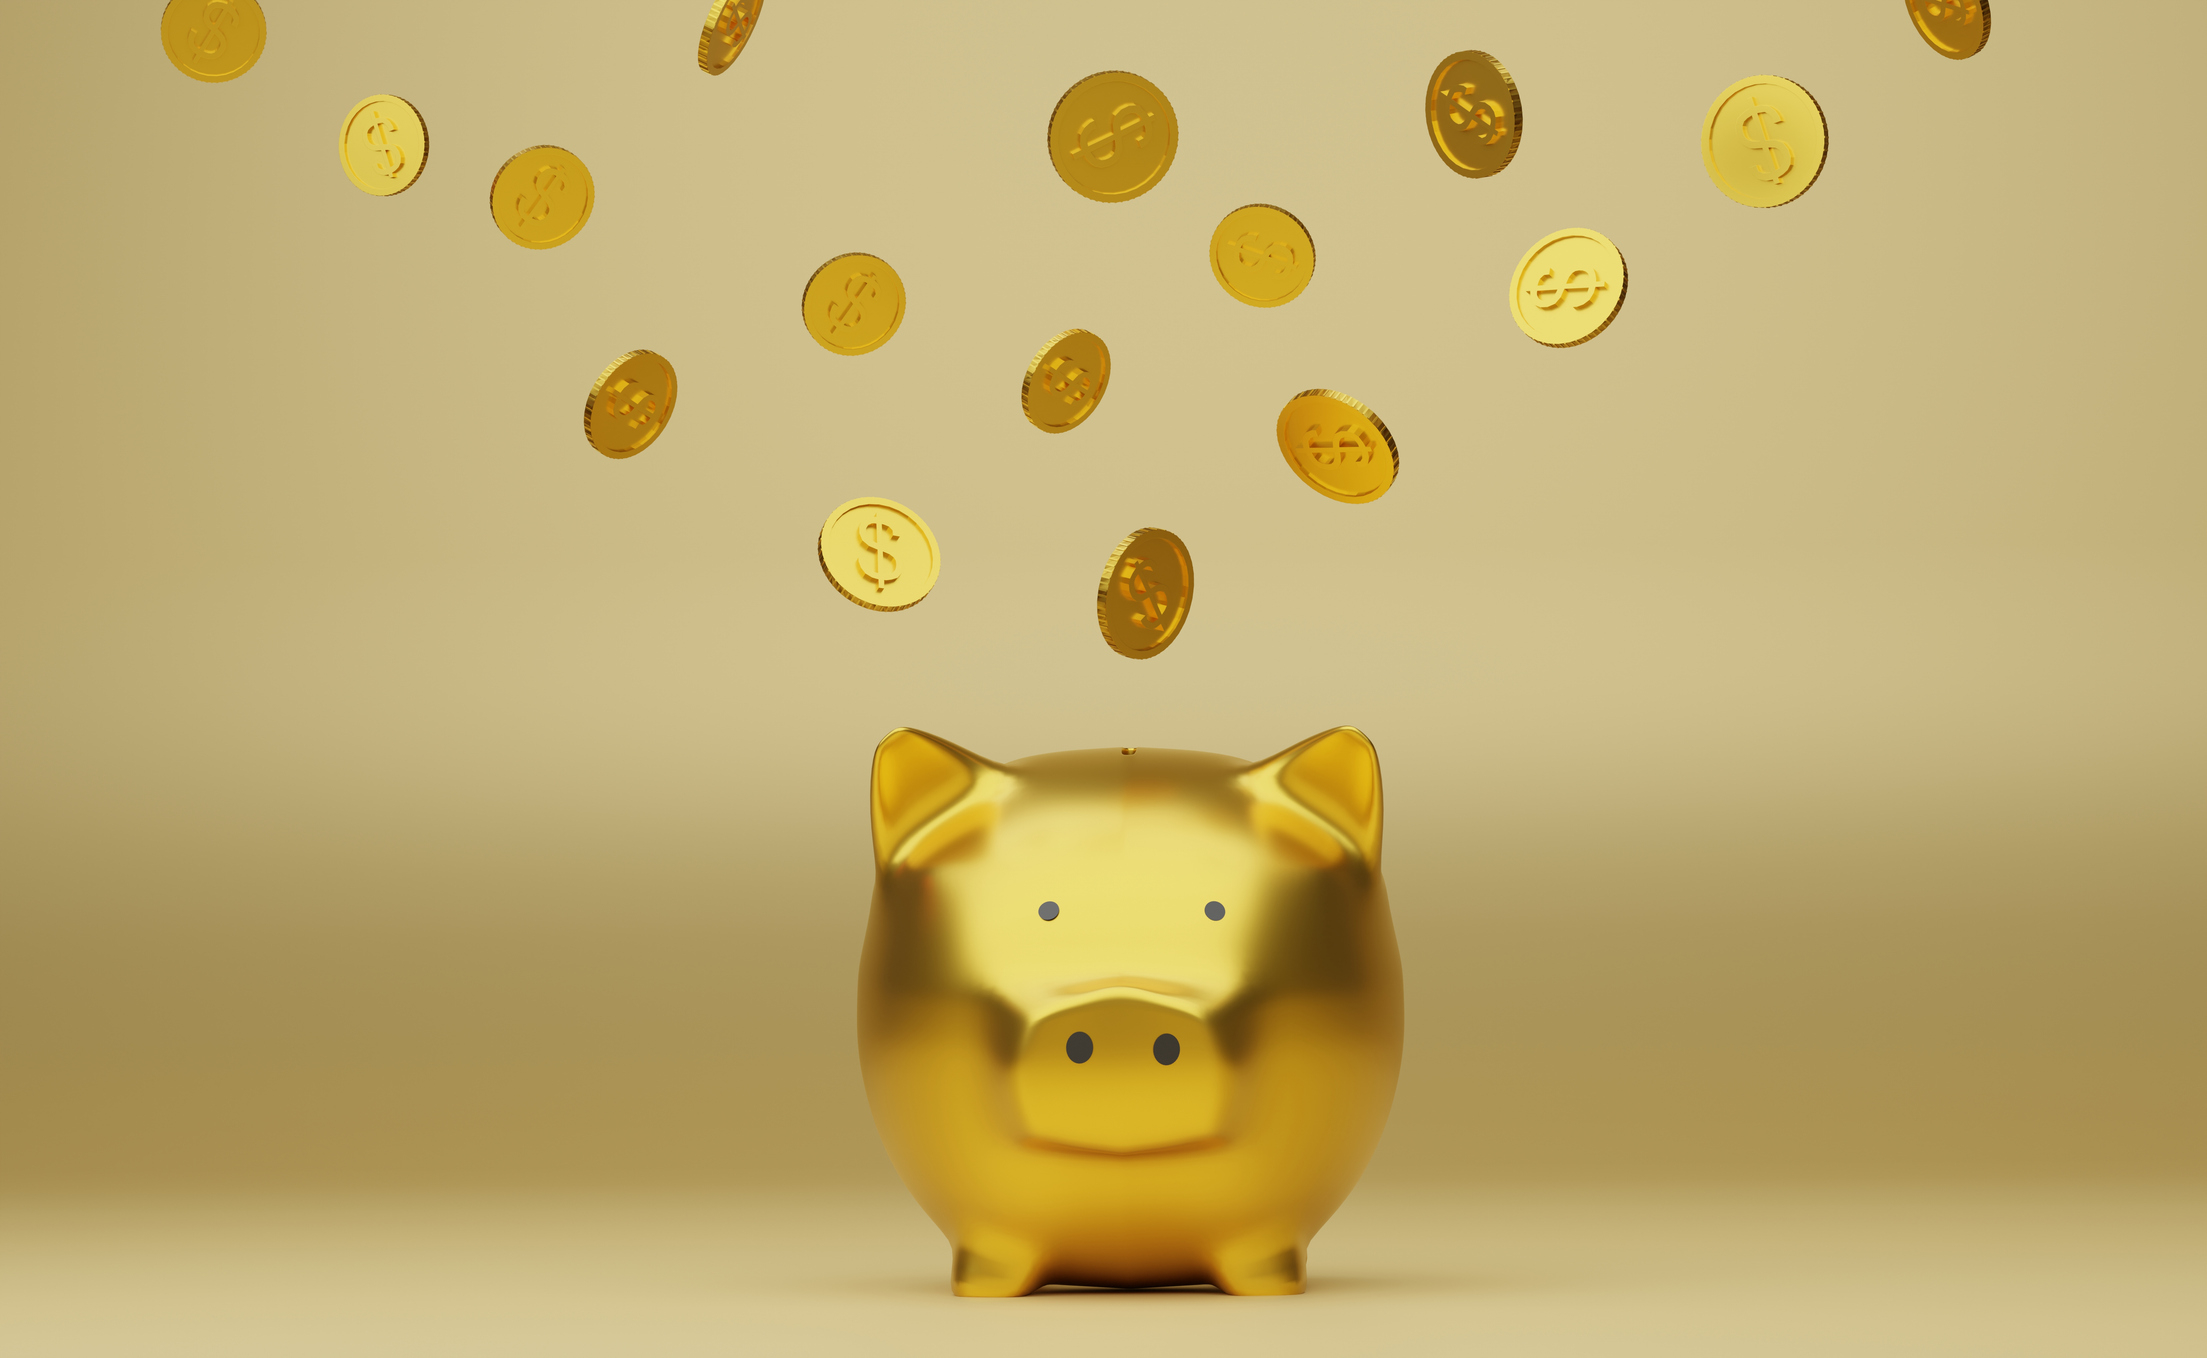 Gold piggy bank with coins falling into it, symbolizing saving money or investment